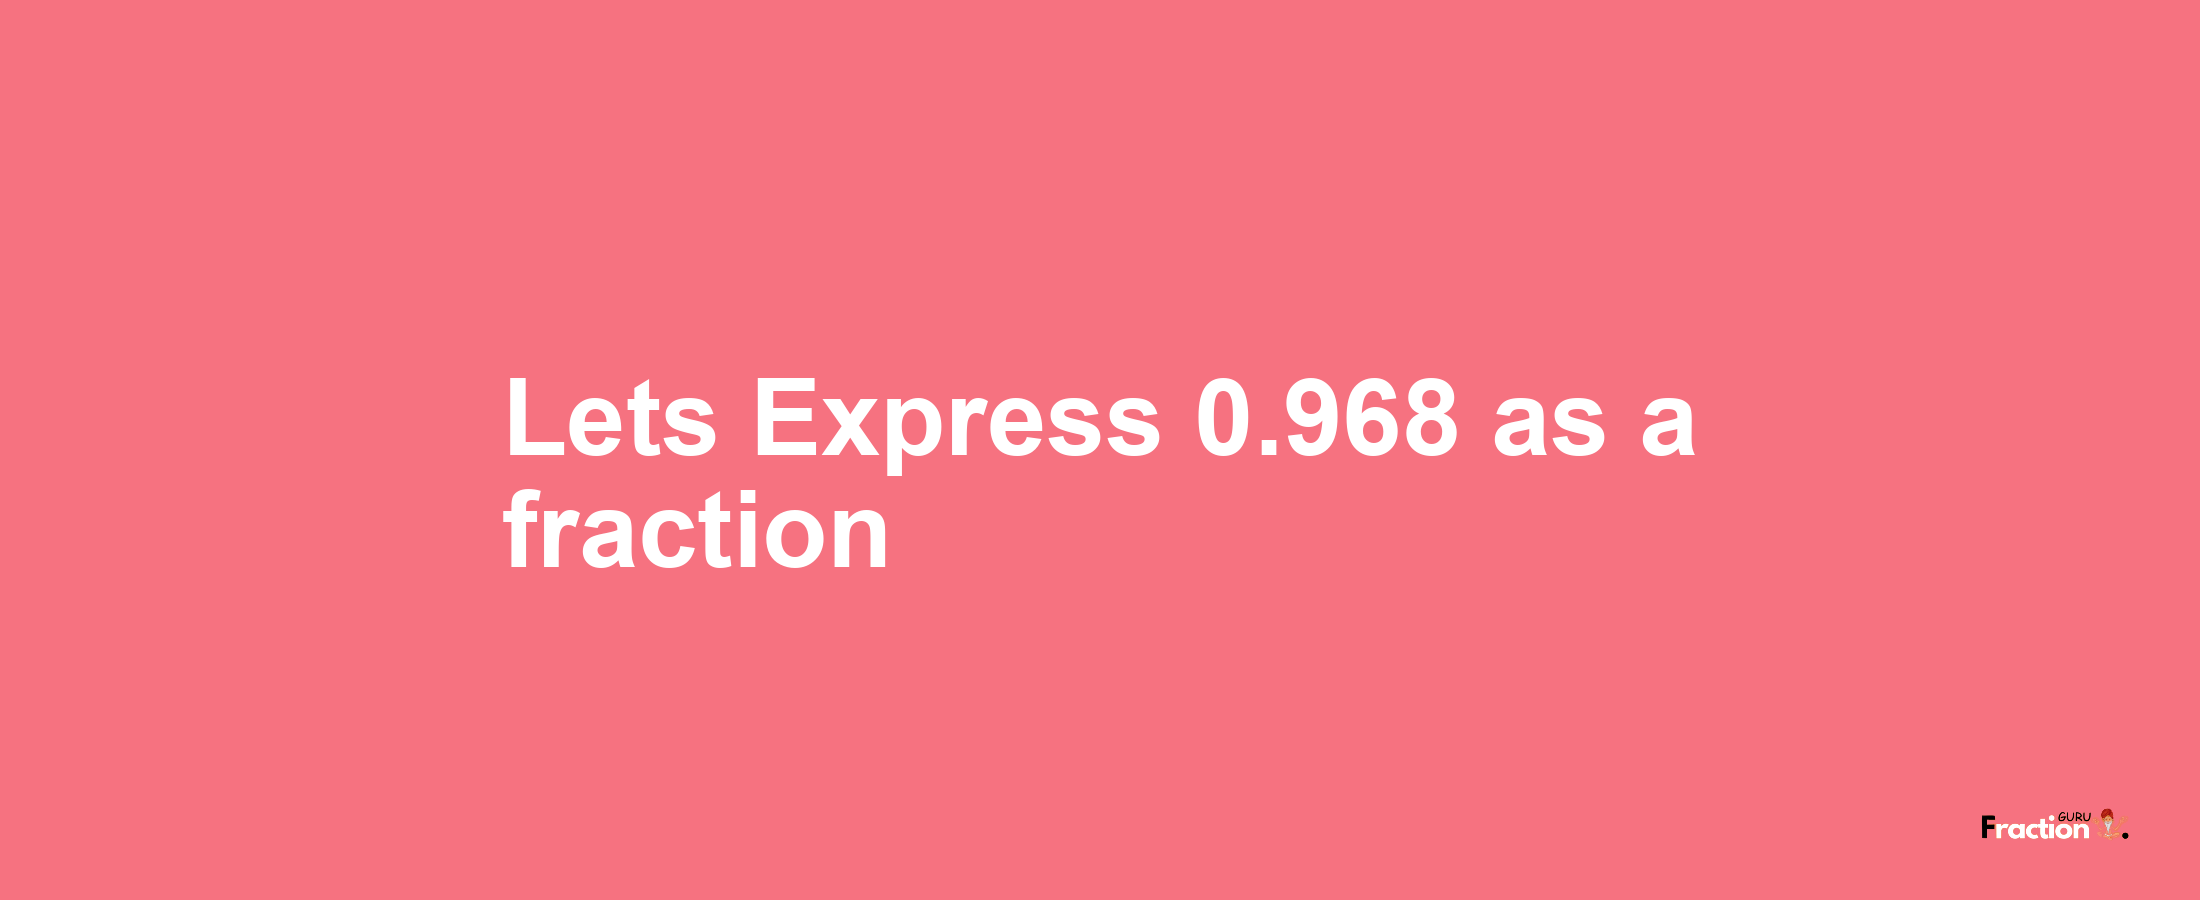 Lets Express 0.968 as afraction